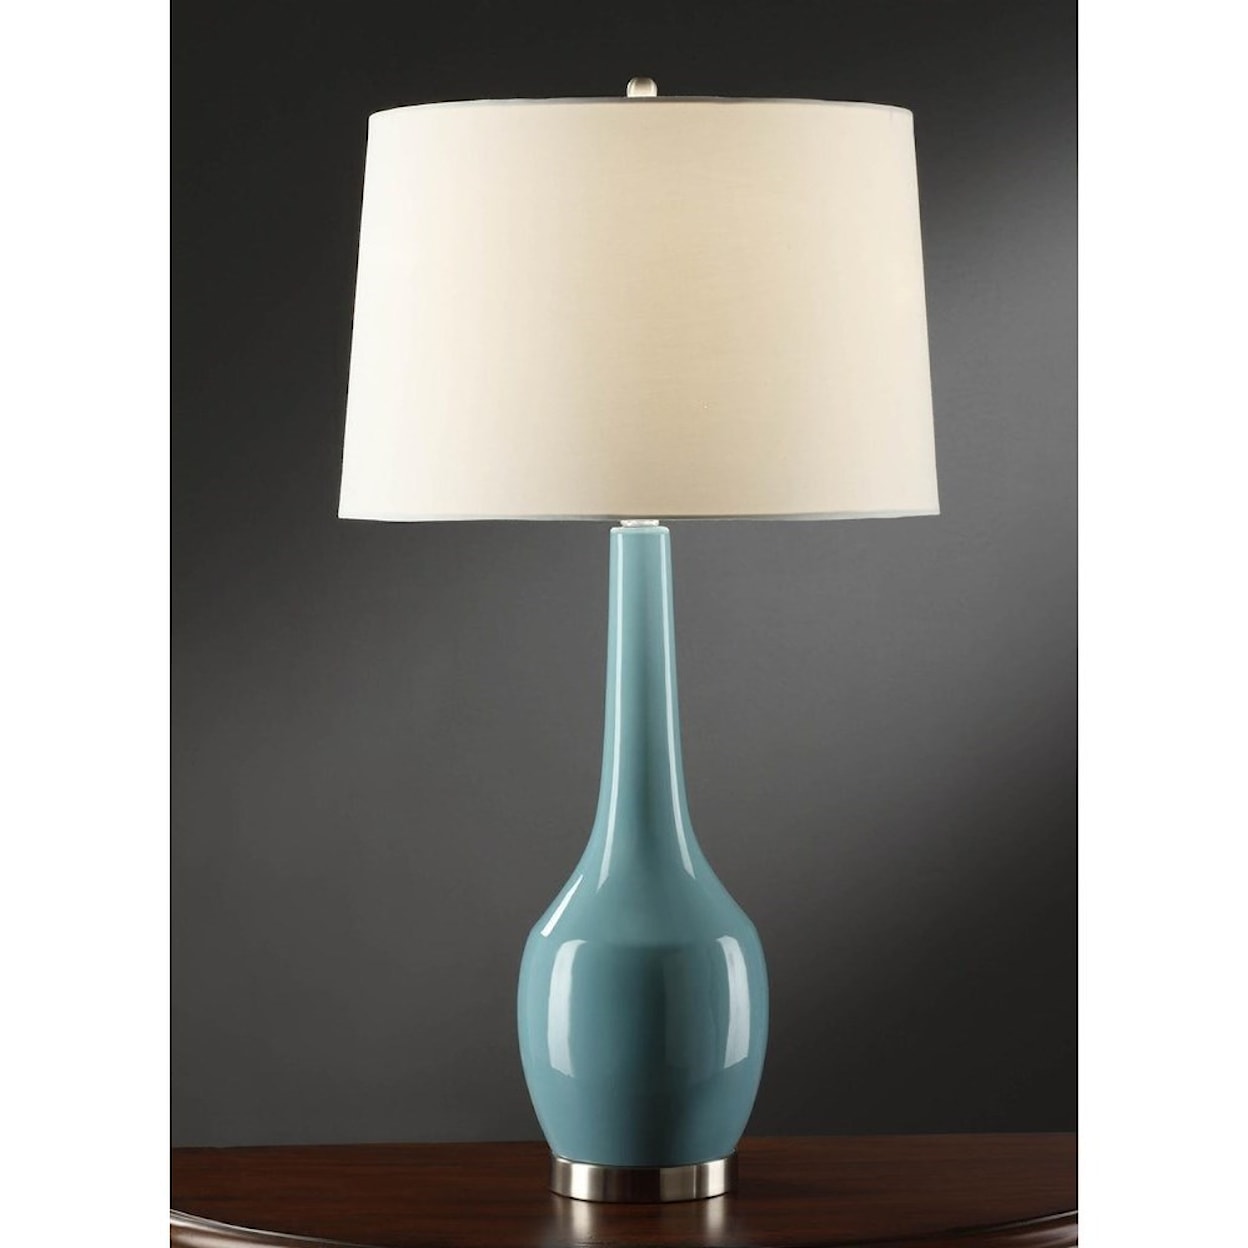 Crestview Collection Lighting Nina Blue Table Lamp